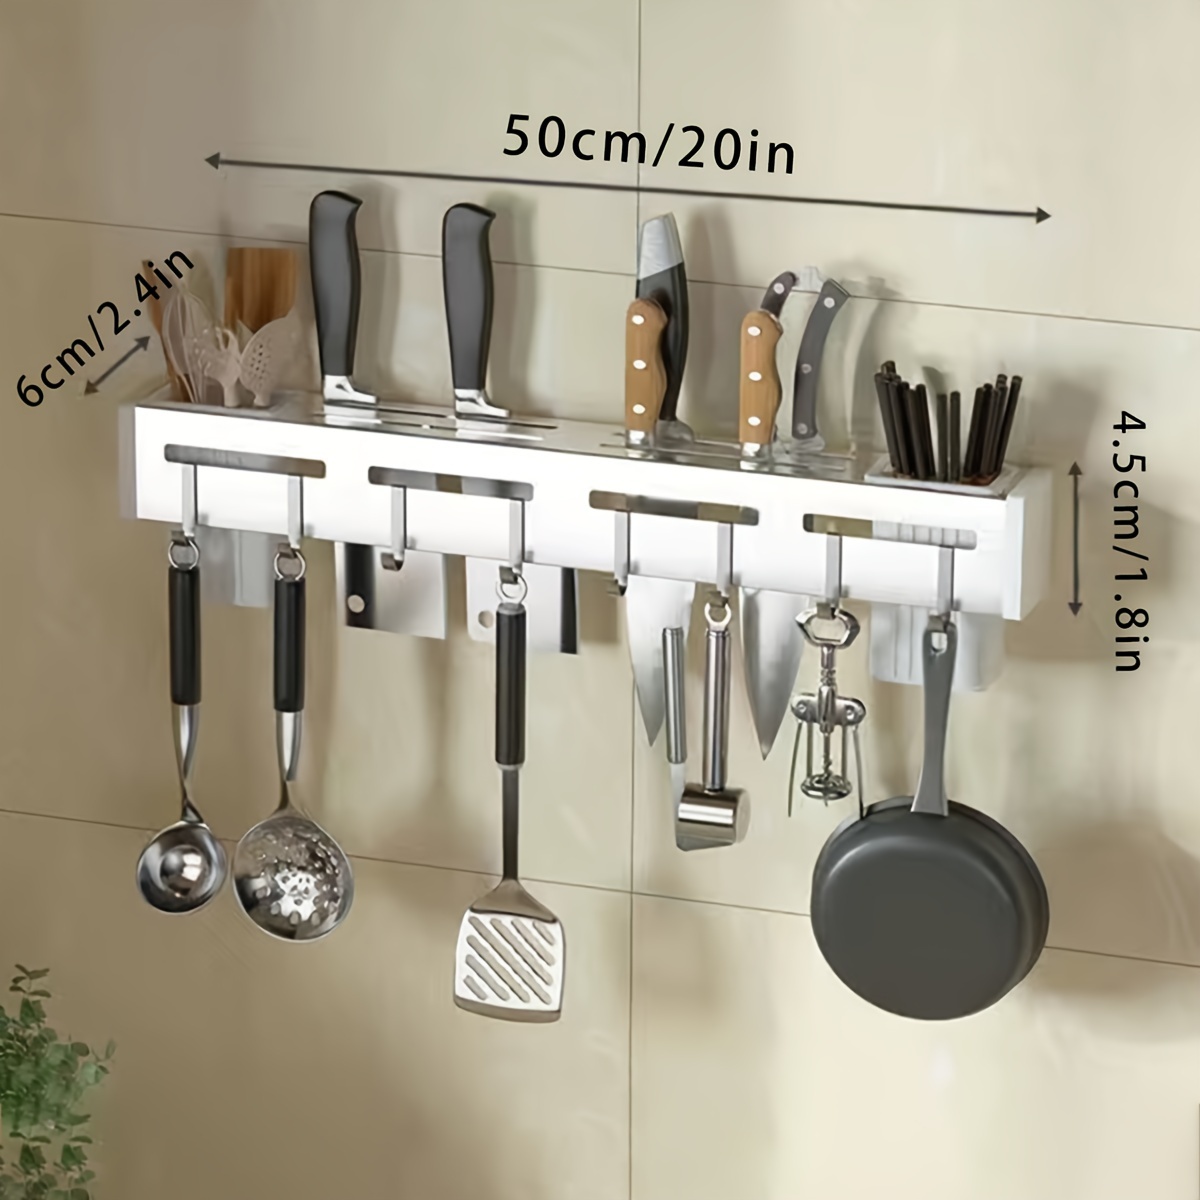 How to Store Cookware, Knives and Kitchen Gadgets